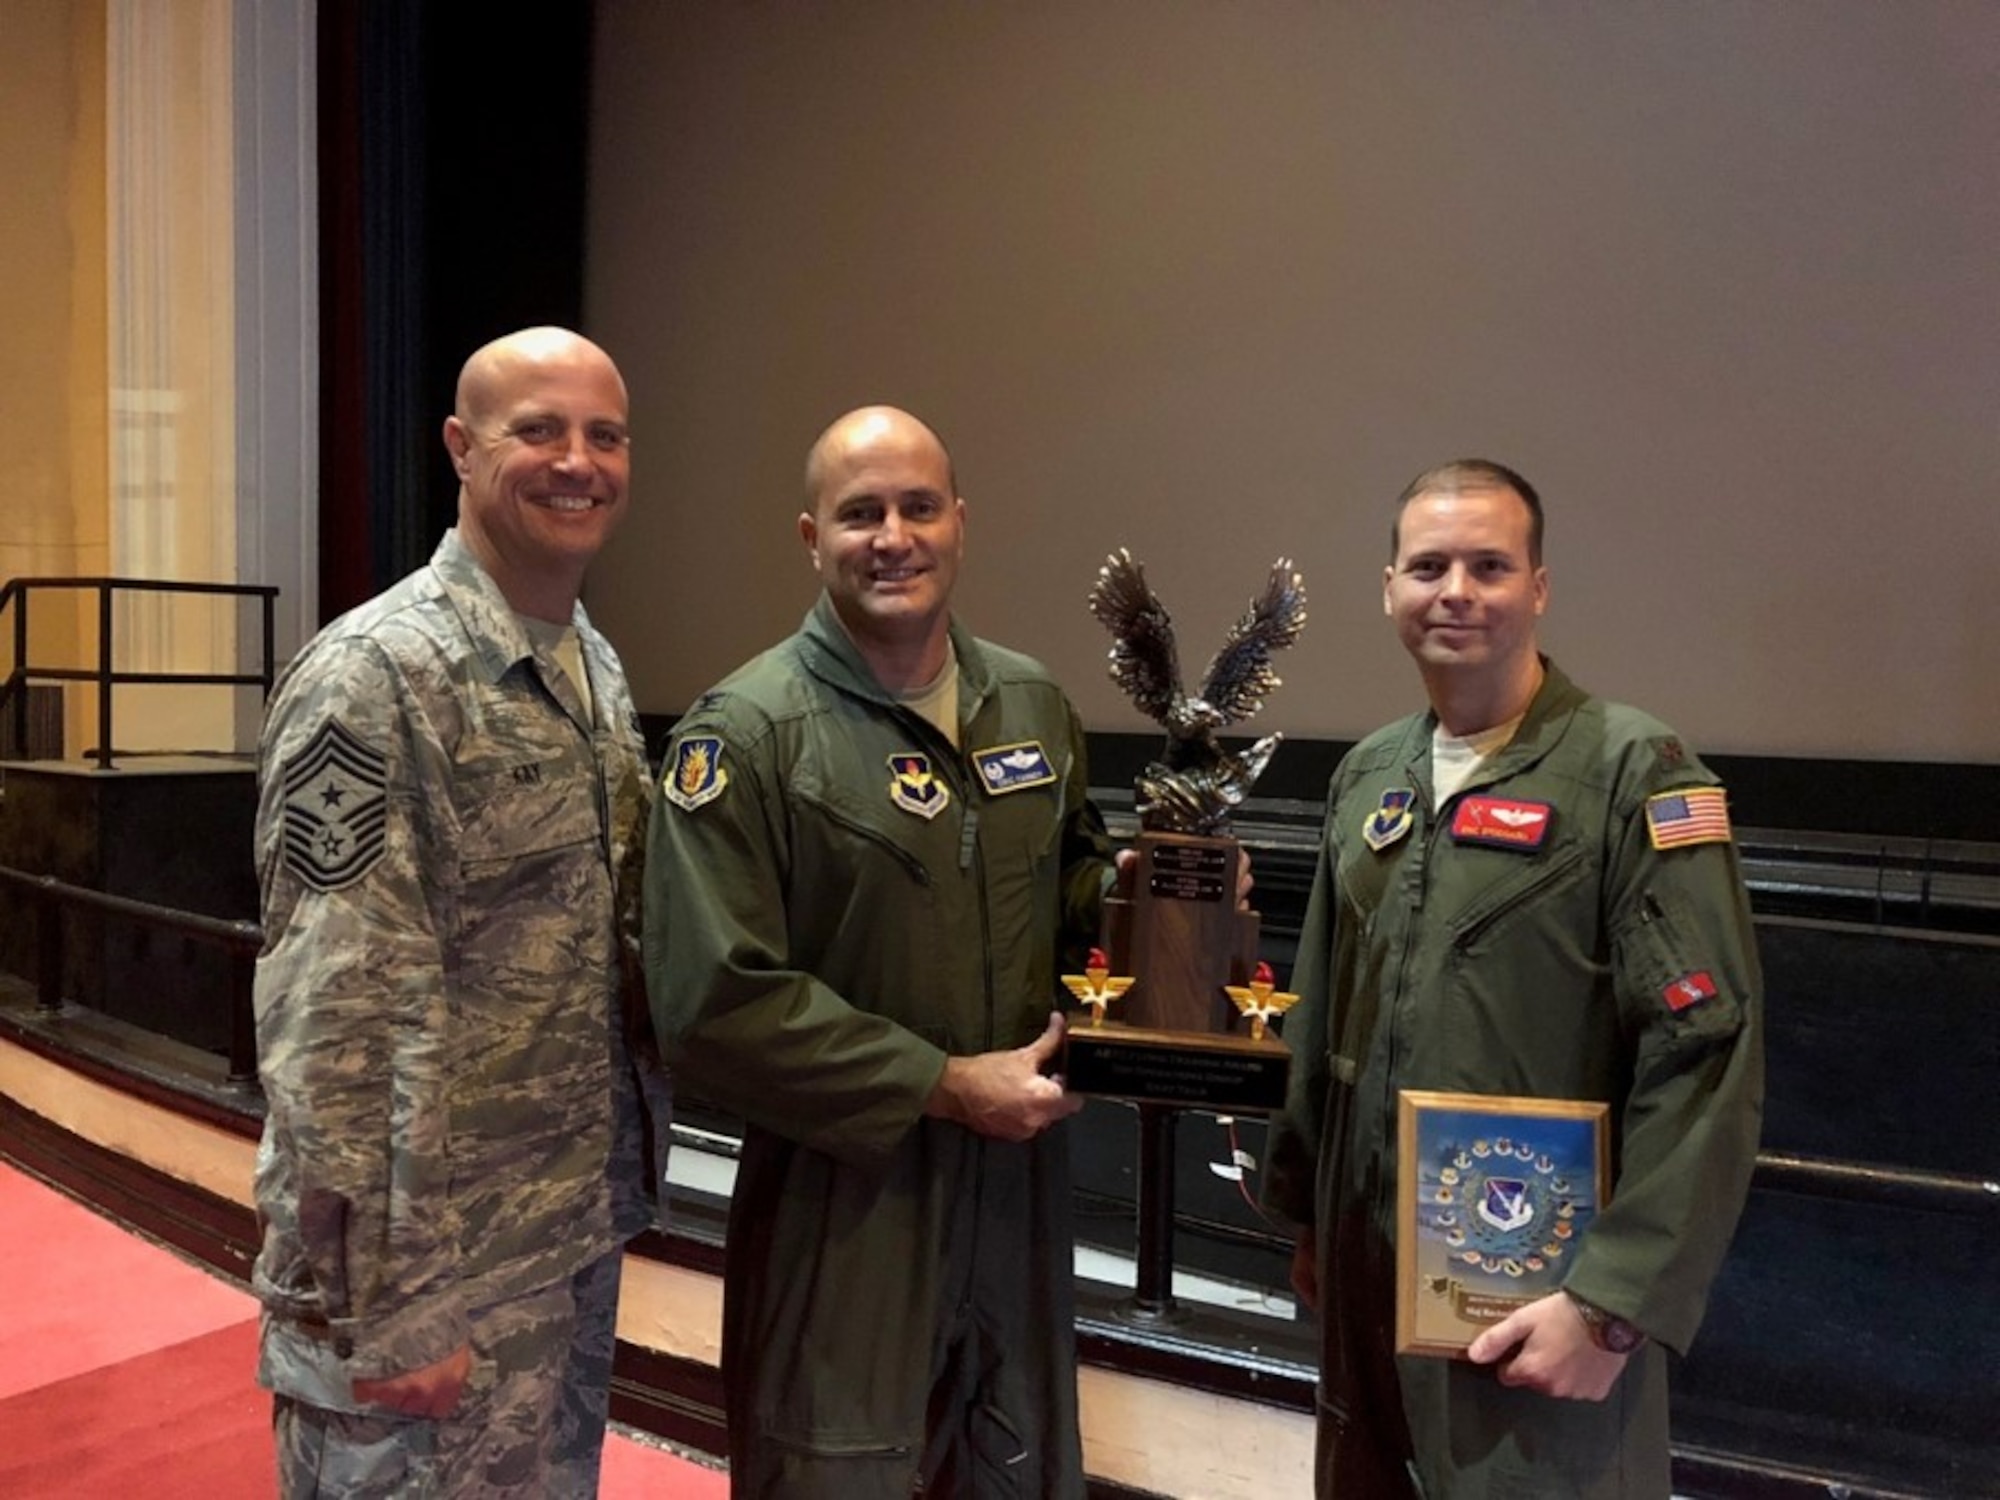 U.S. Air Force Col. Eric Carney, 97th Air Mobility Wing commander, Chief Master Sgt. Randy Kay, 97th AMW Command Chief and Maj. Eric Stoddard, 58th Airlift Squadron Commander of Standards and Evaluation, receive the Top Operations Group-Gray Tail Division Award Group during the Air Education and Training Command Flying Training Awards Ceremony Oct. 26, 2018, at Joint Base San Antonio-Randolph, Texas. The annual event recognizes the exceptional personnel dedicated to training aircrew across the 19th Air Force. (Courtesy Photo)